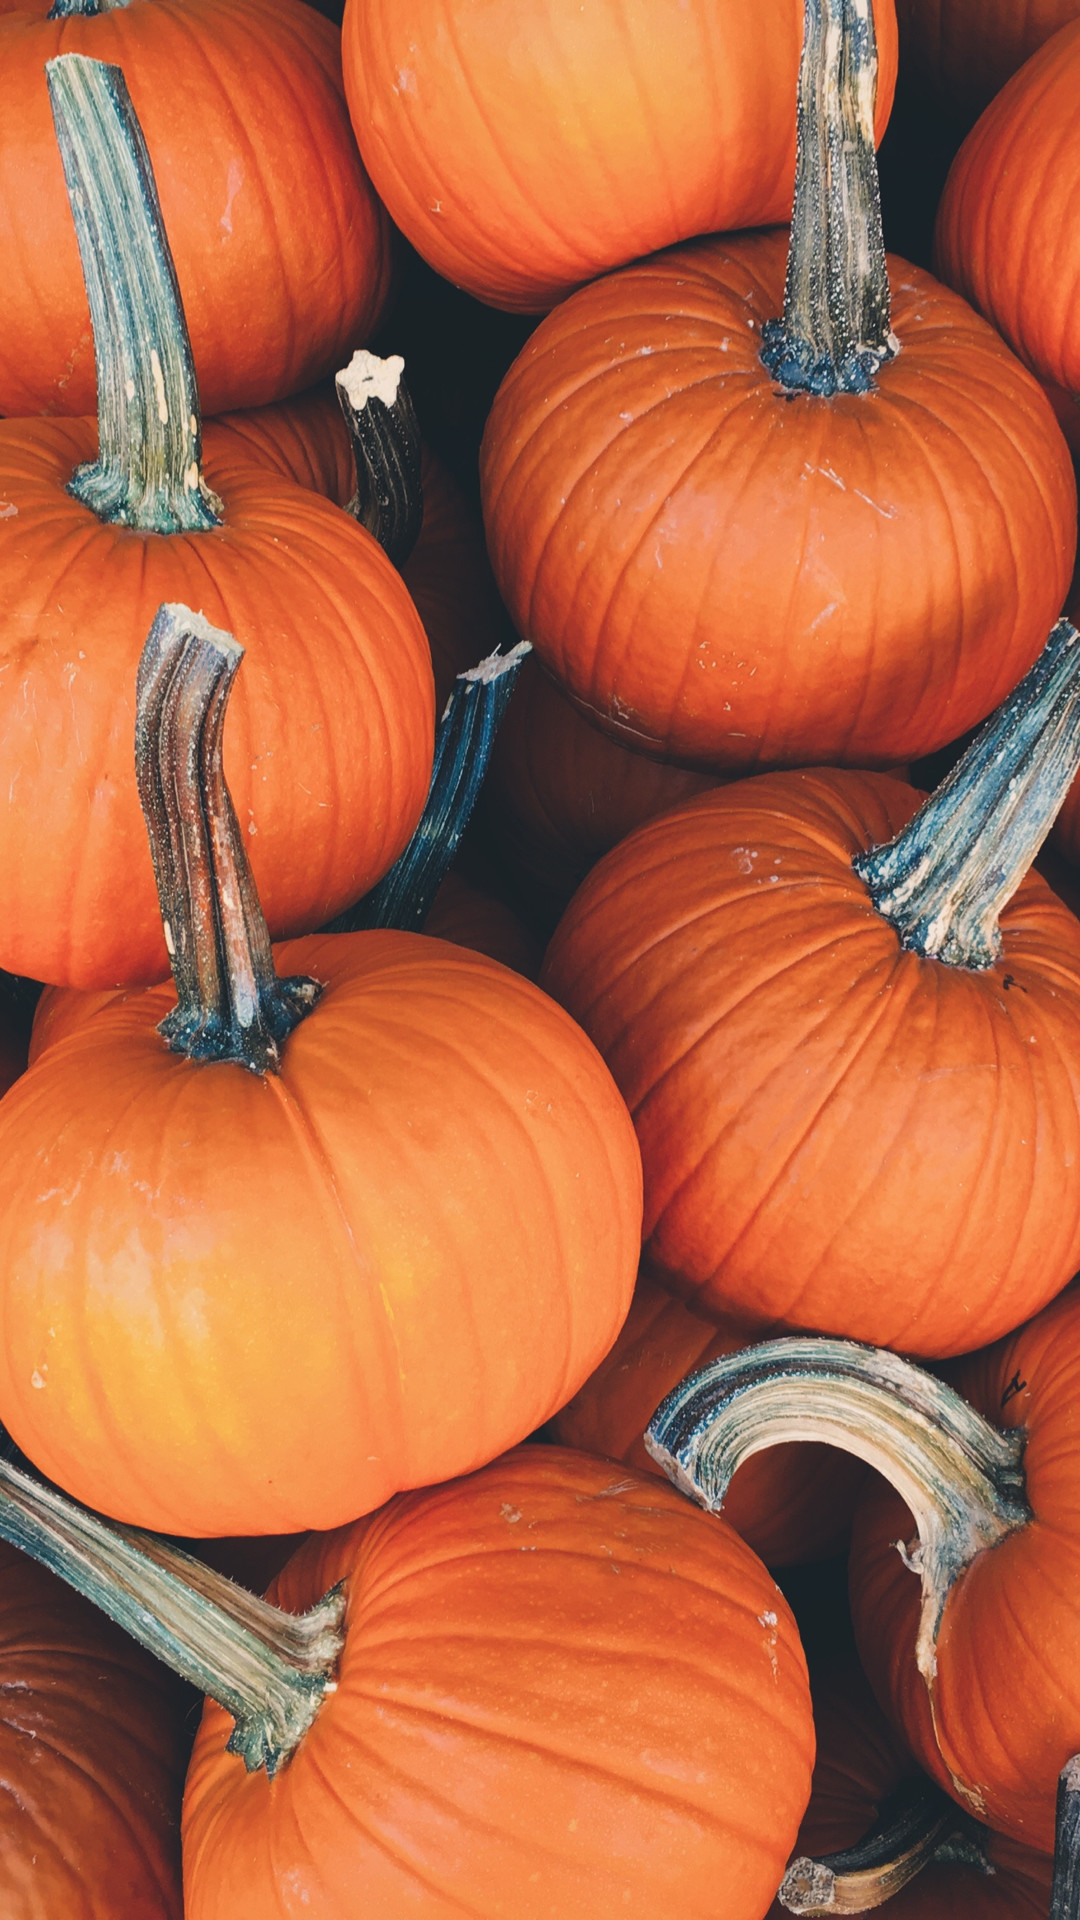 1080x1920 Wallpaper Weekends: A Touch of Pumpkin Spice for Mac, iPhone, iPad, and